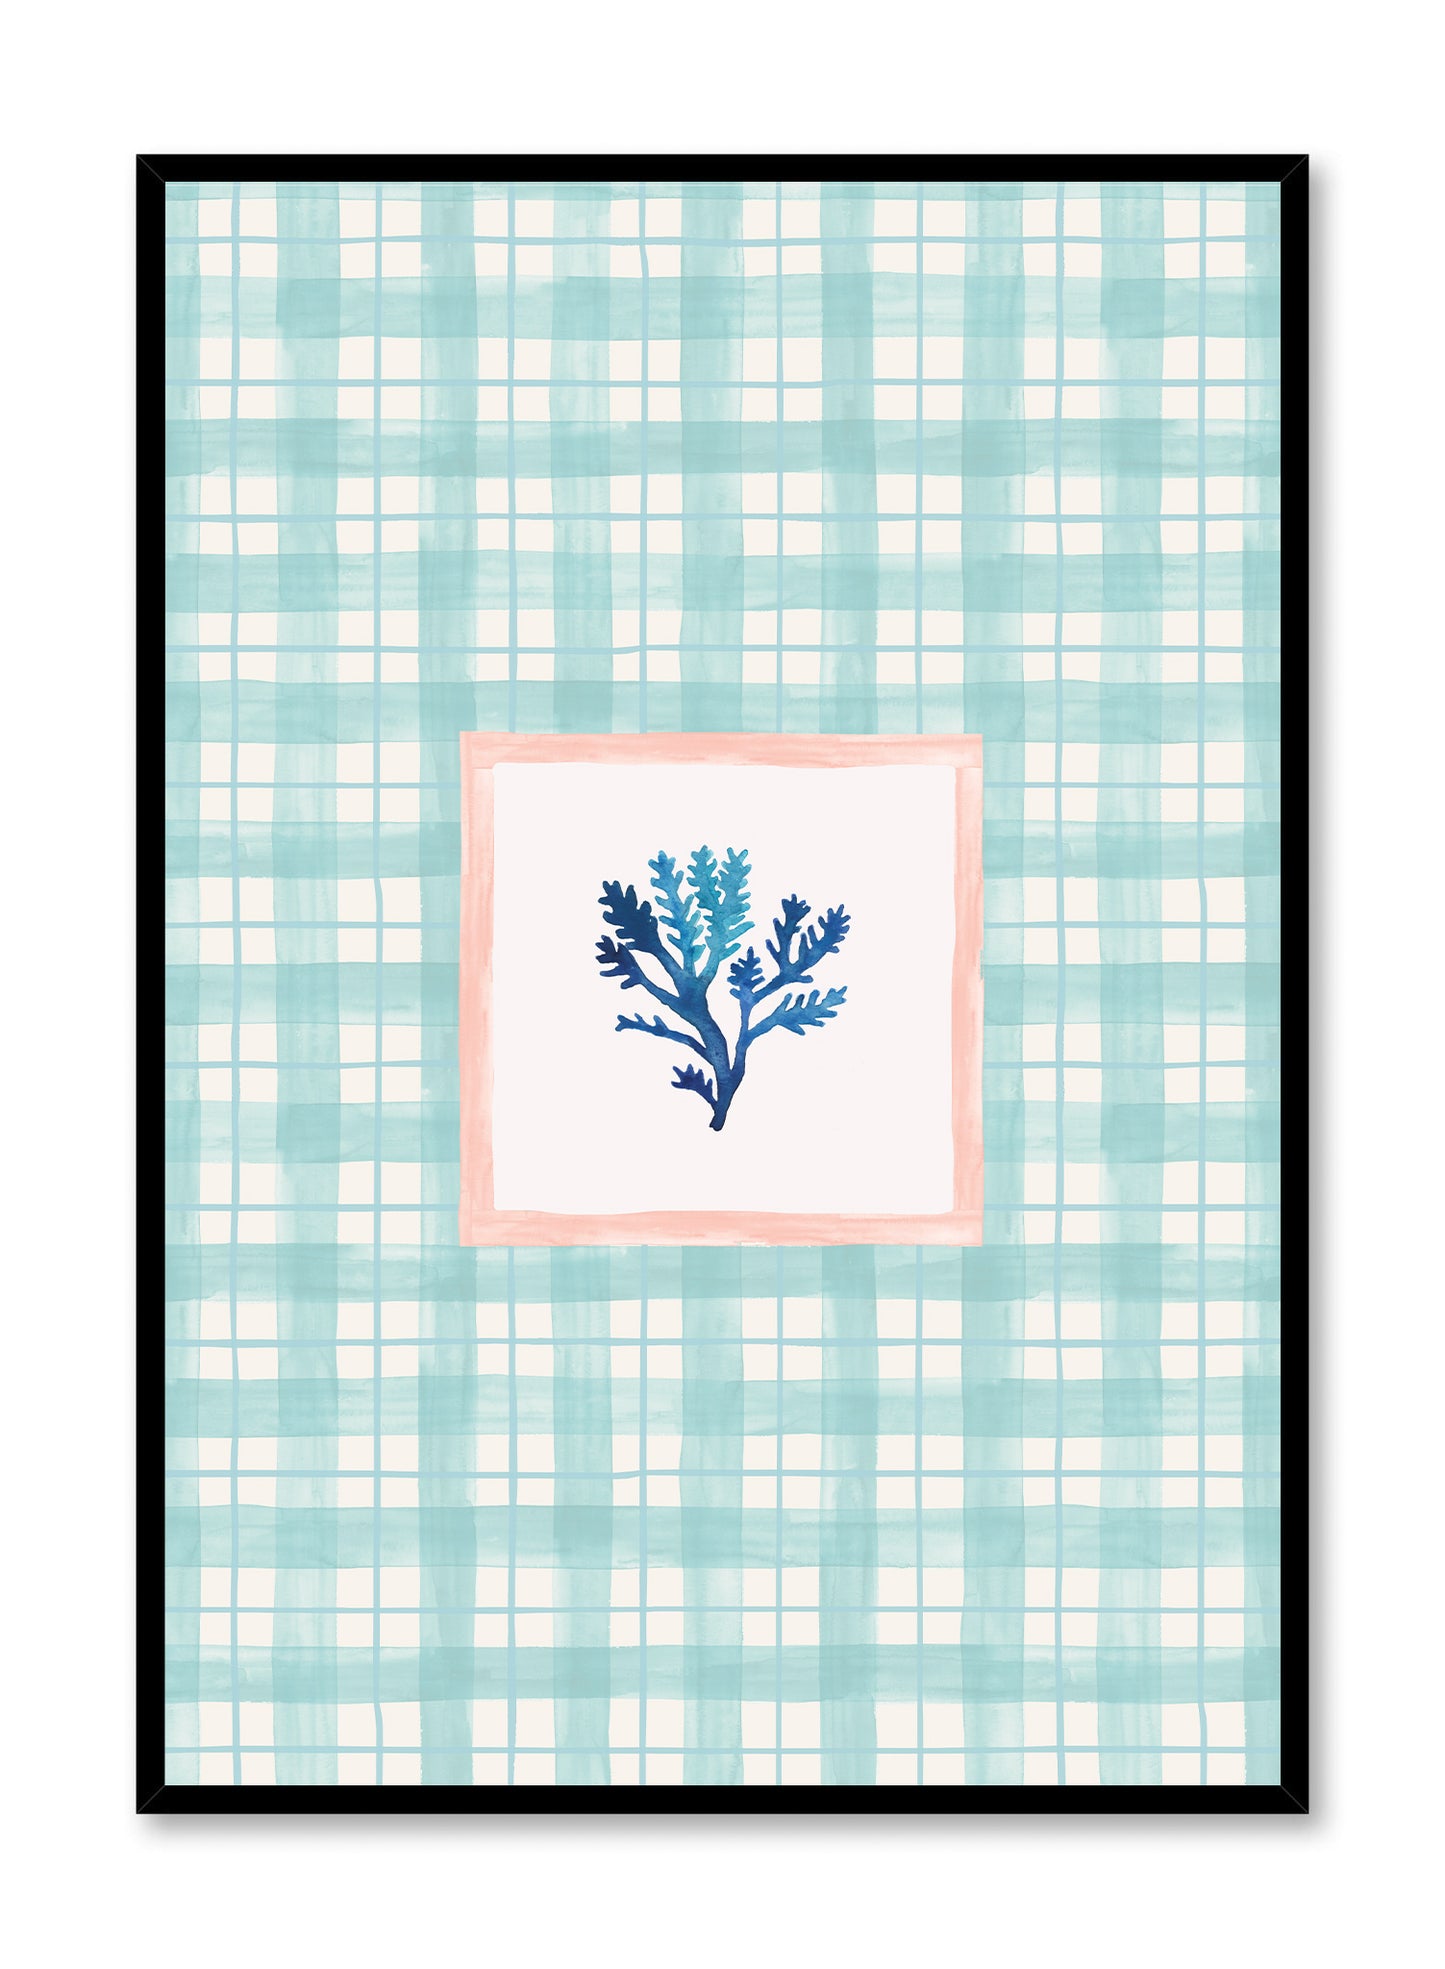 Corals and Plaid, Poster